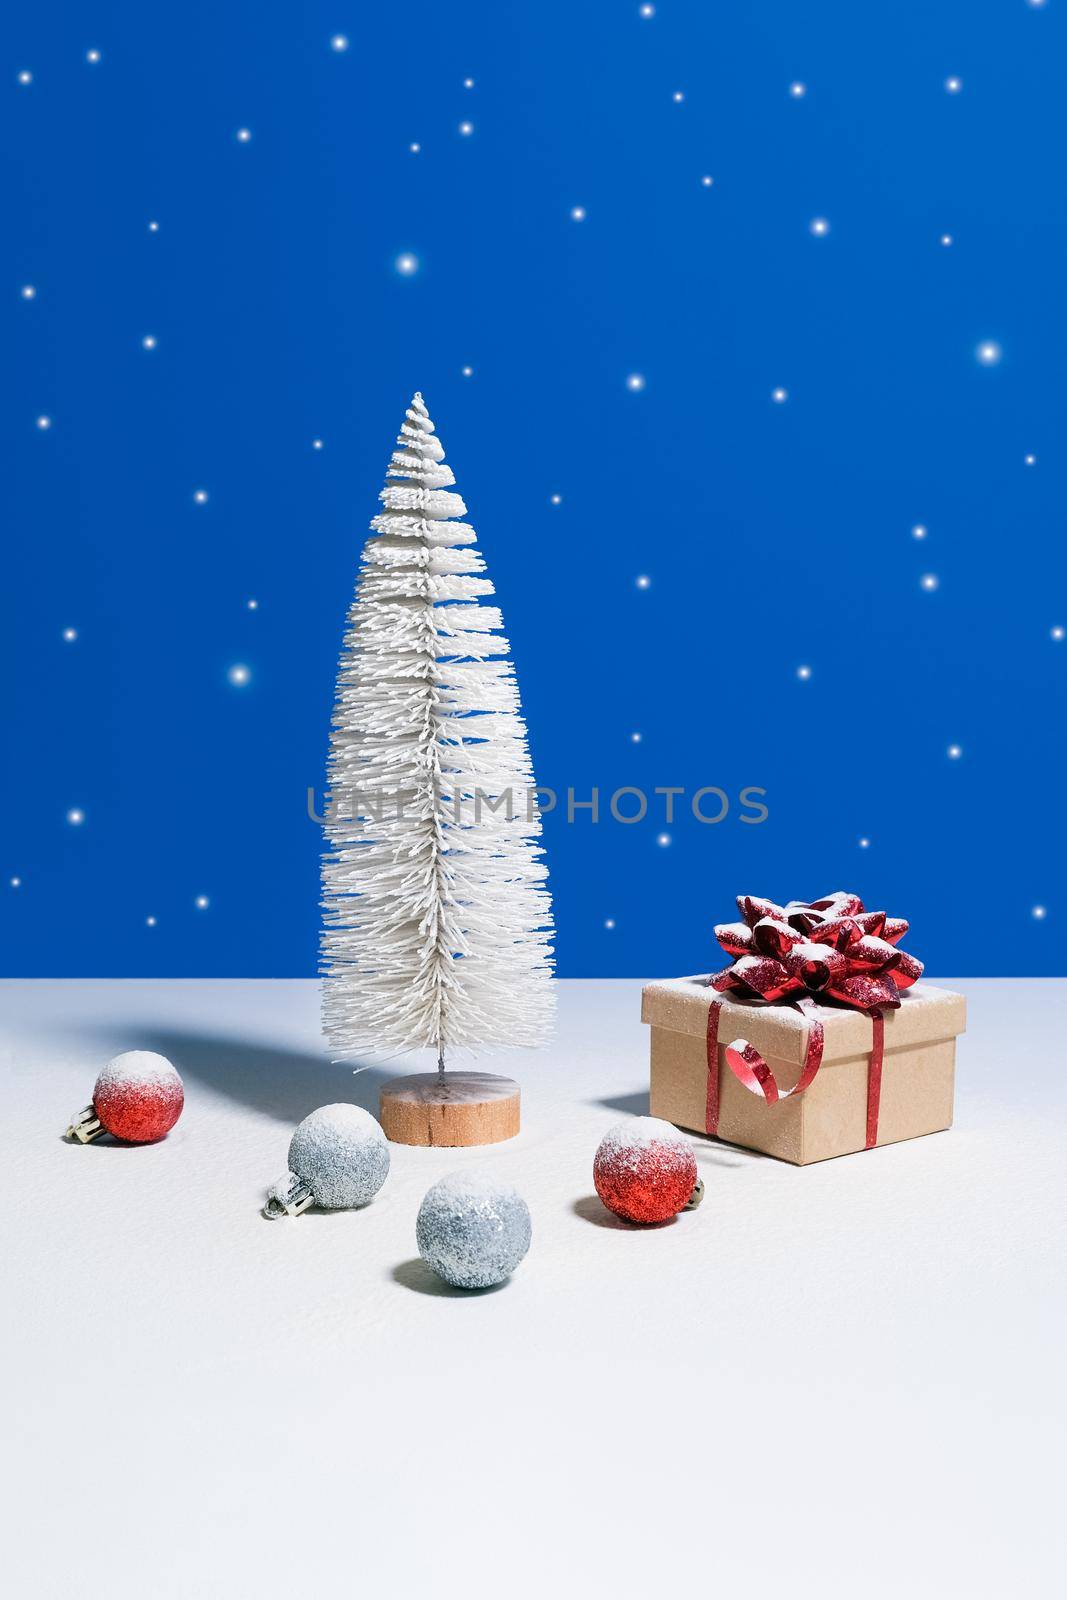 Beautiful Christmas or New Year banner. Toy Christmas tree, gift box with red bow and Christmas baubles on blue background with snow falling on the background